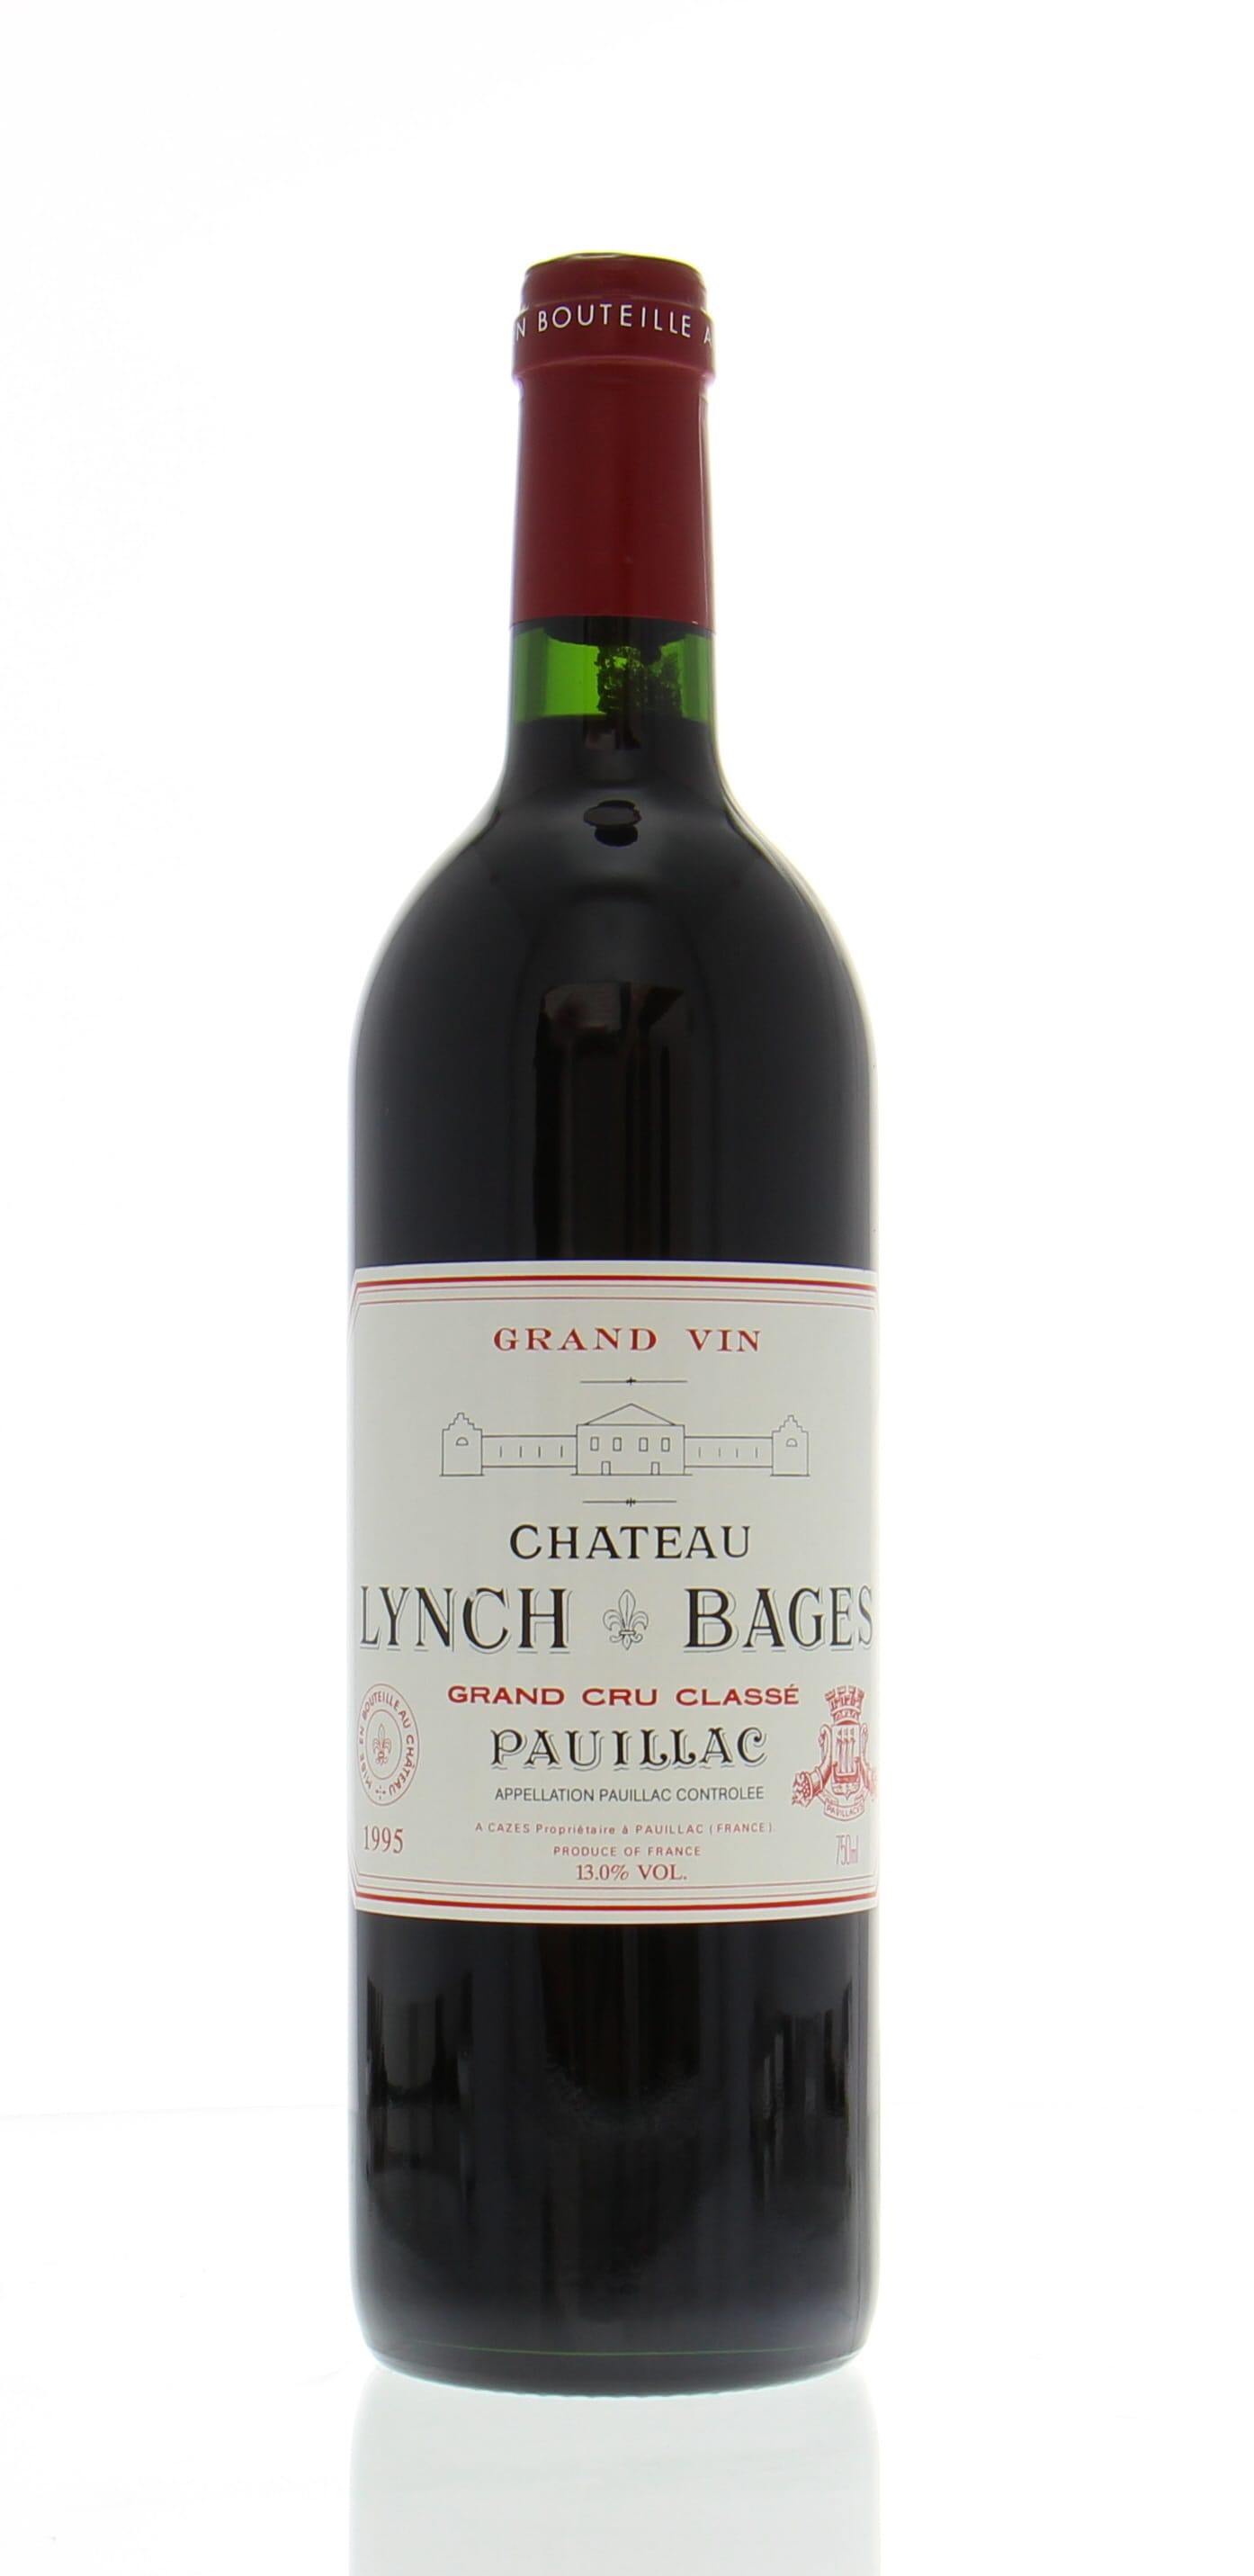 Chateau Lynch Bages - Chateau Lynch Bages 1995 perfect